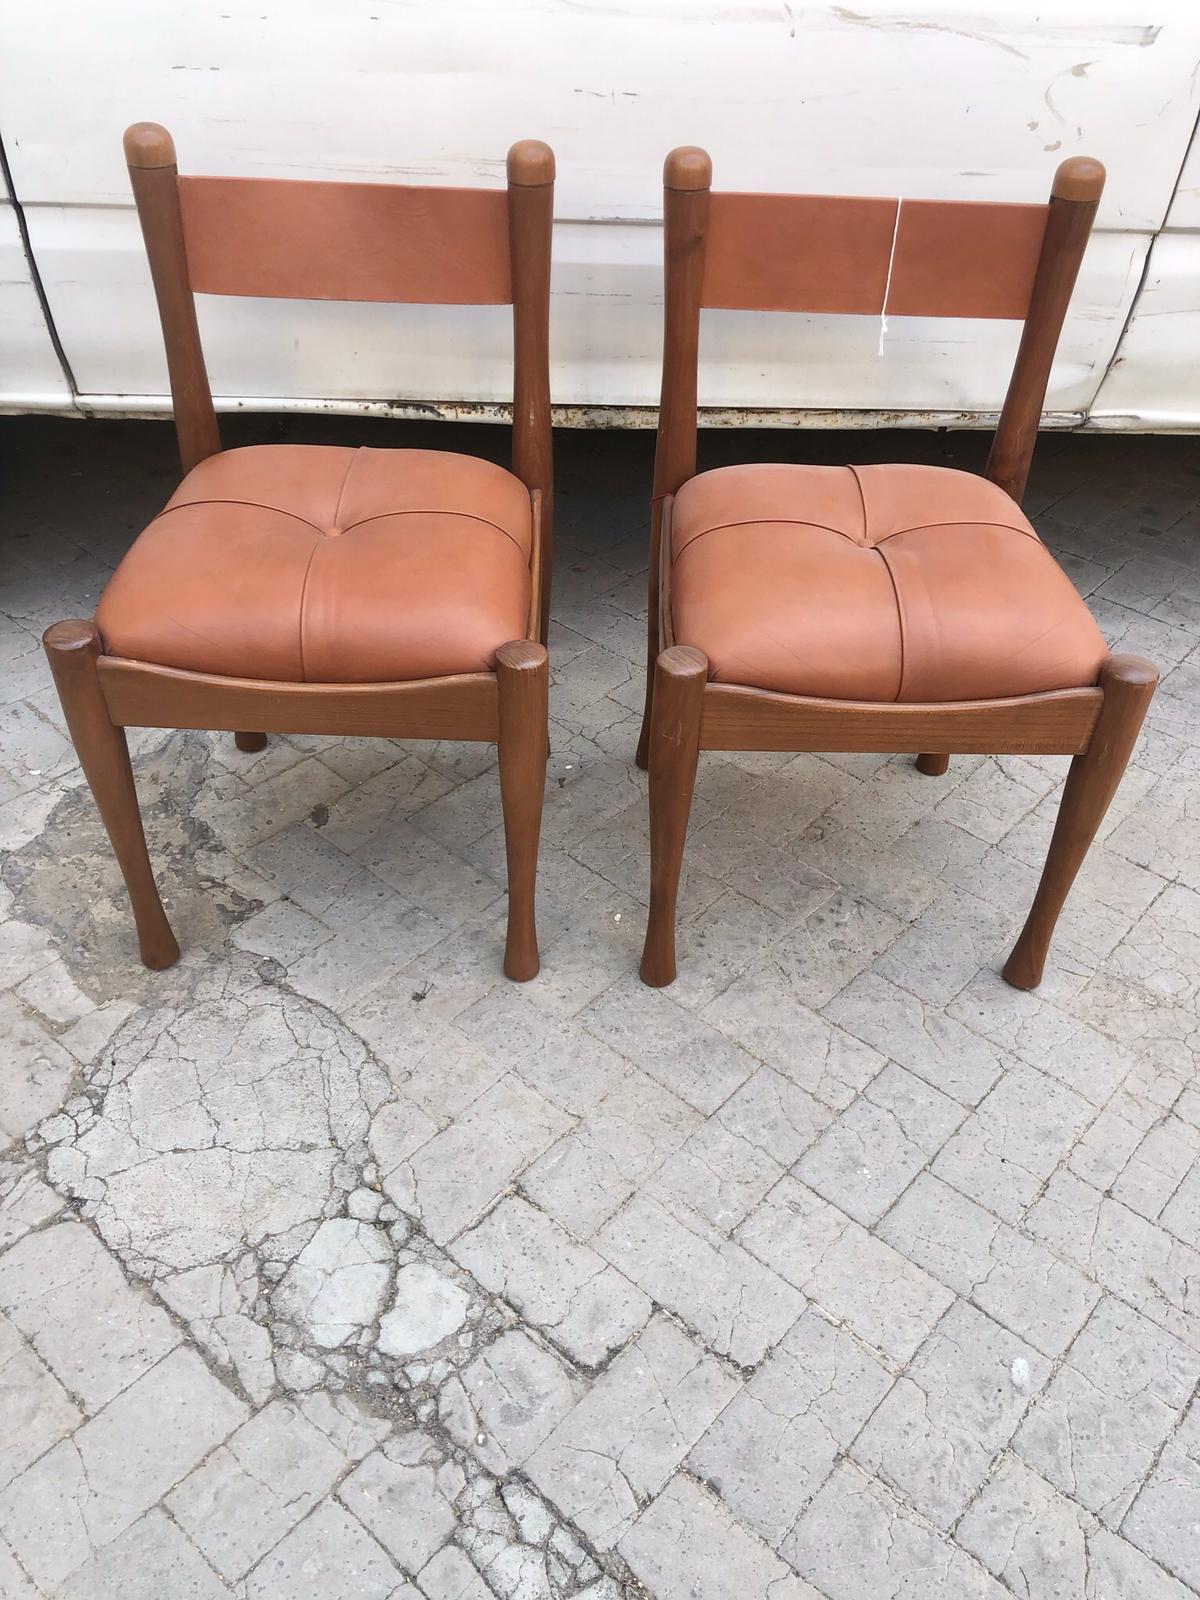 Amazing pair of Italian Mid-Century Modern Silvio Coppola chairs for Bernini.
This set of two chairs was designed by Silvio Coppola for Bernini, and produced in the 1960 in Italy. The chairs frame are made of beech wood with foam padding and